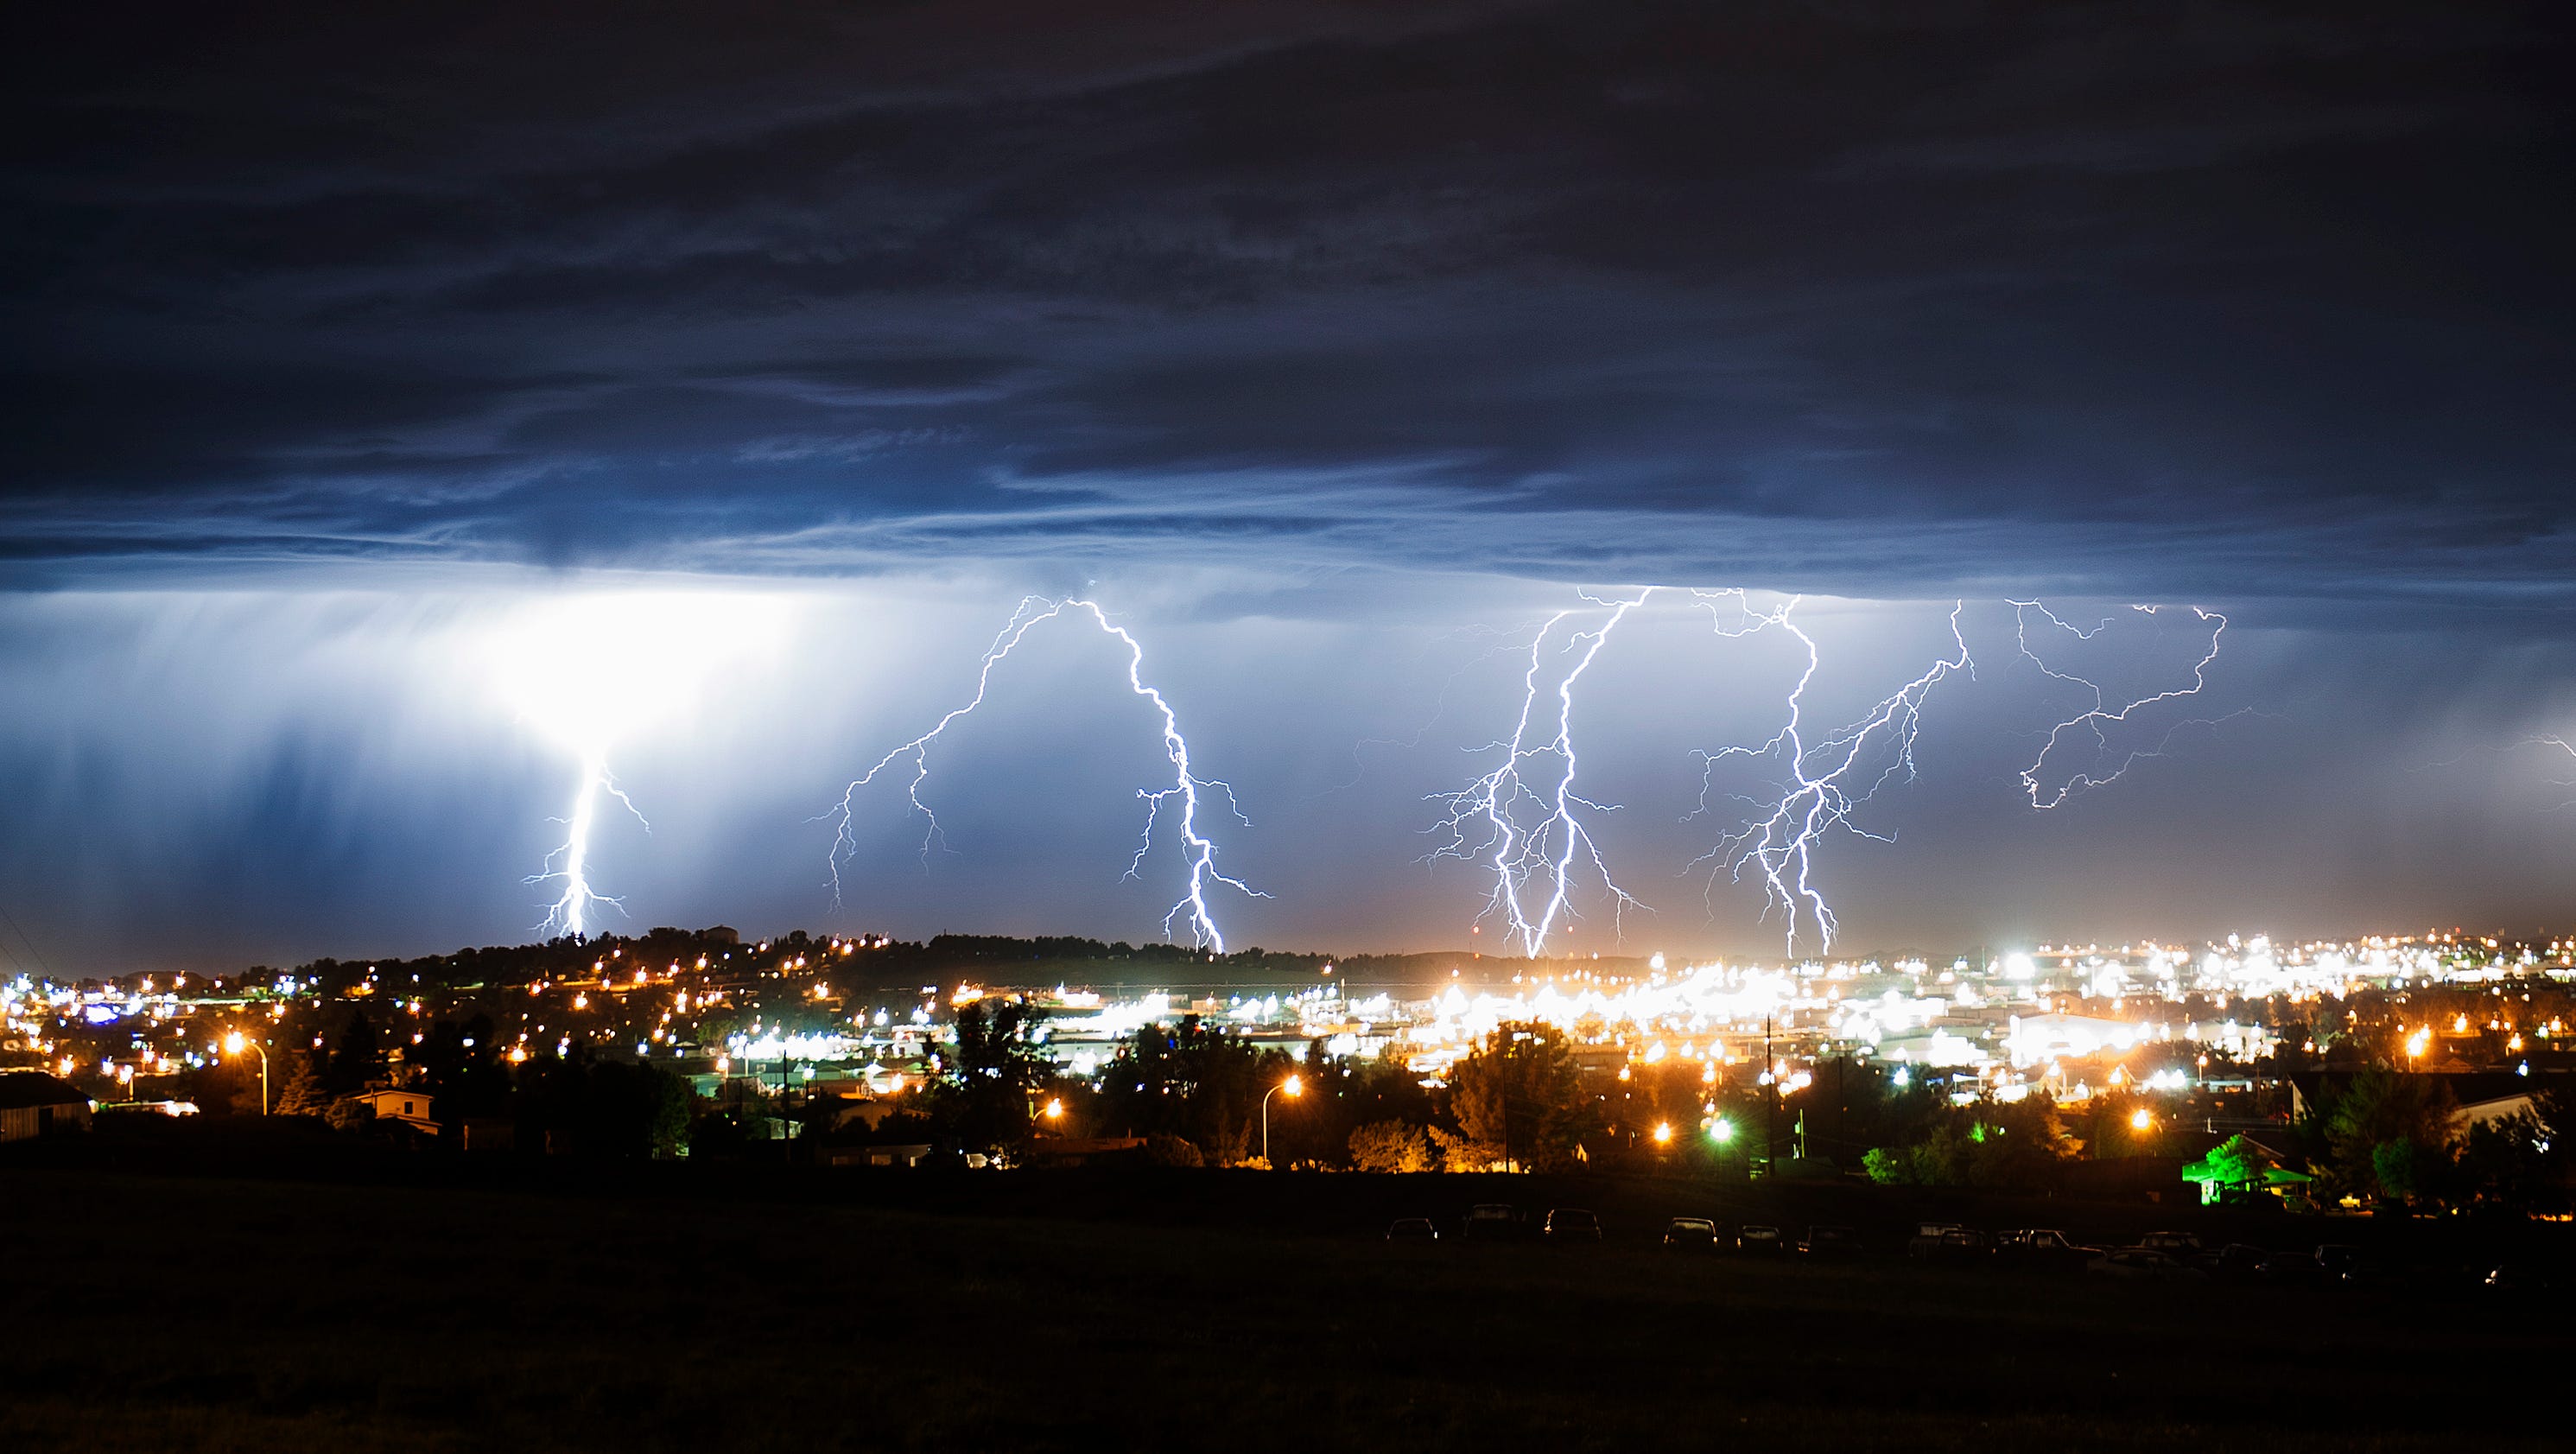 Watch out: July is peak month for lightning fatalities3200 x 1680